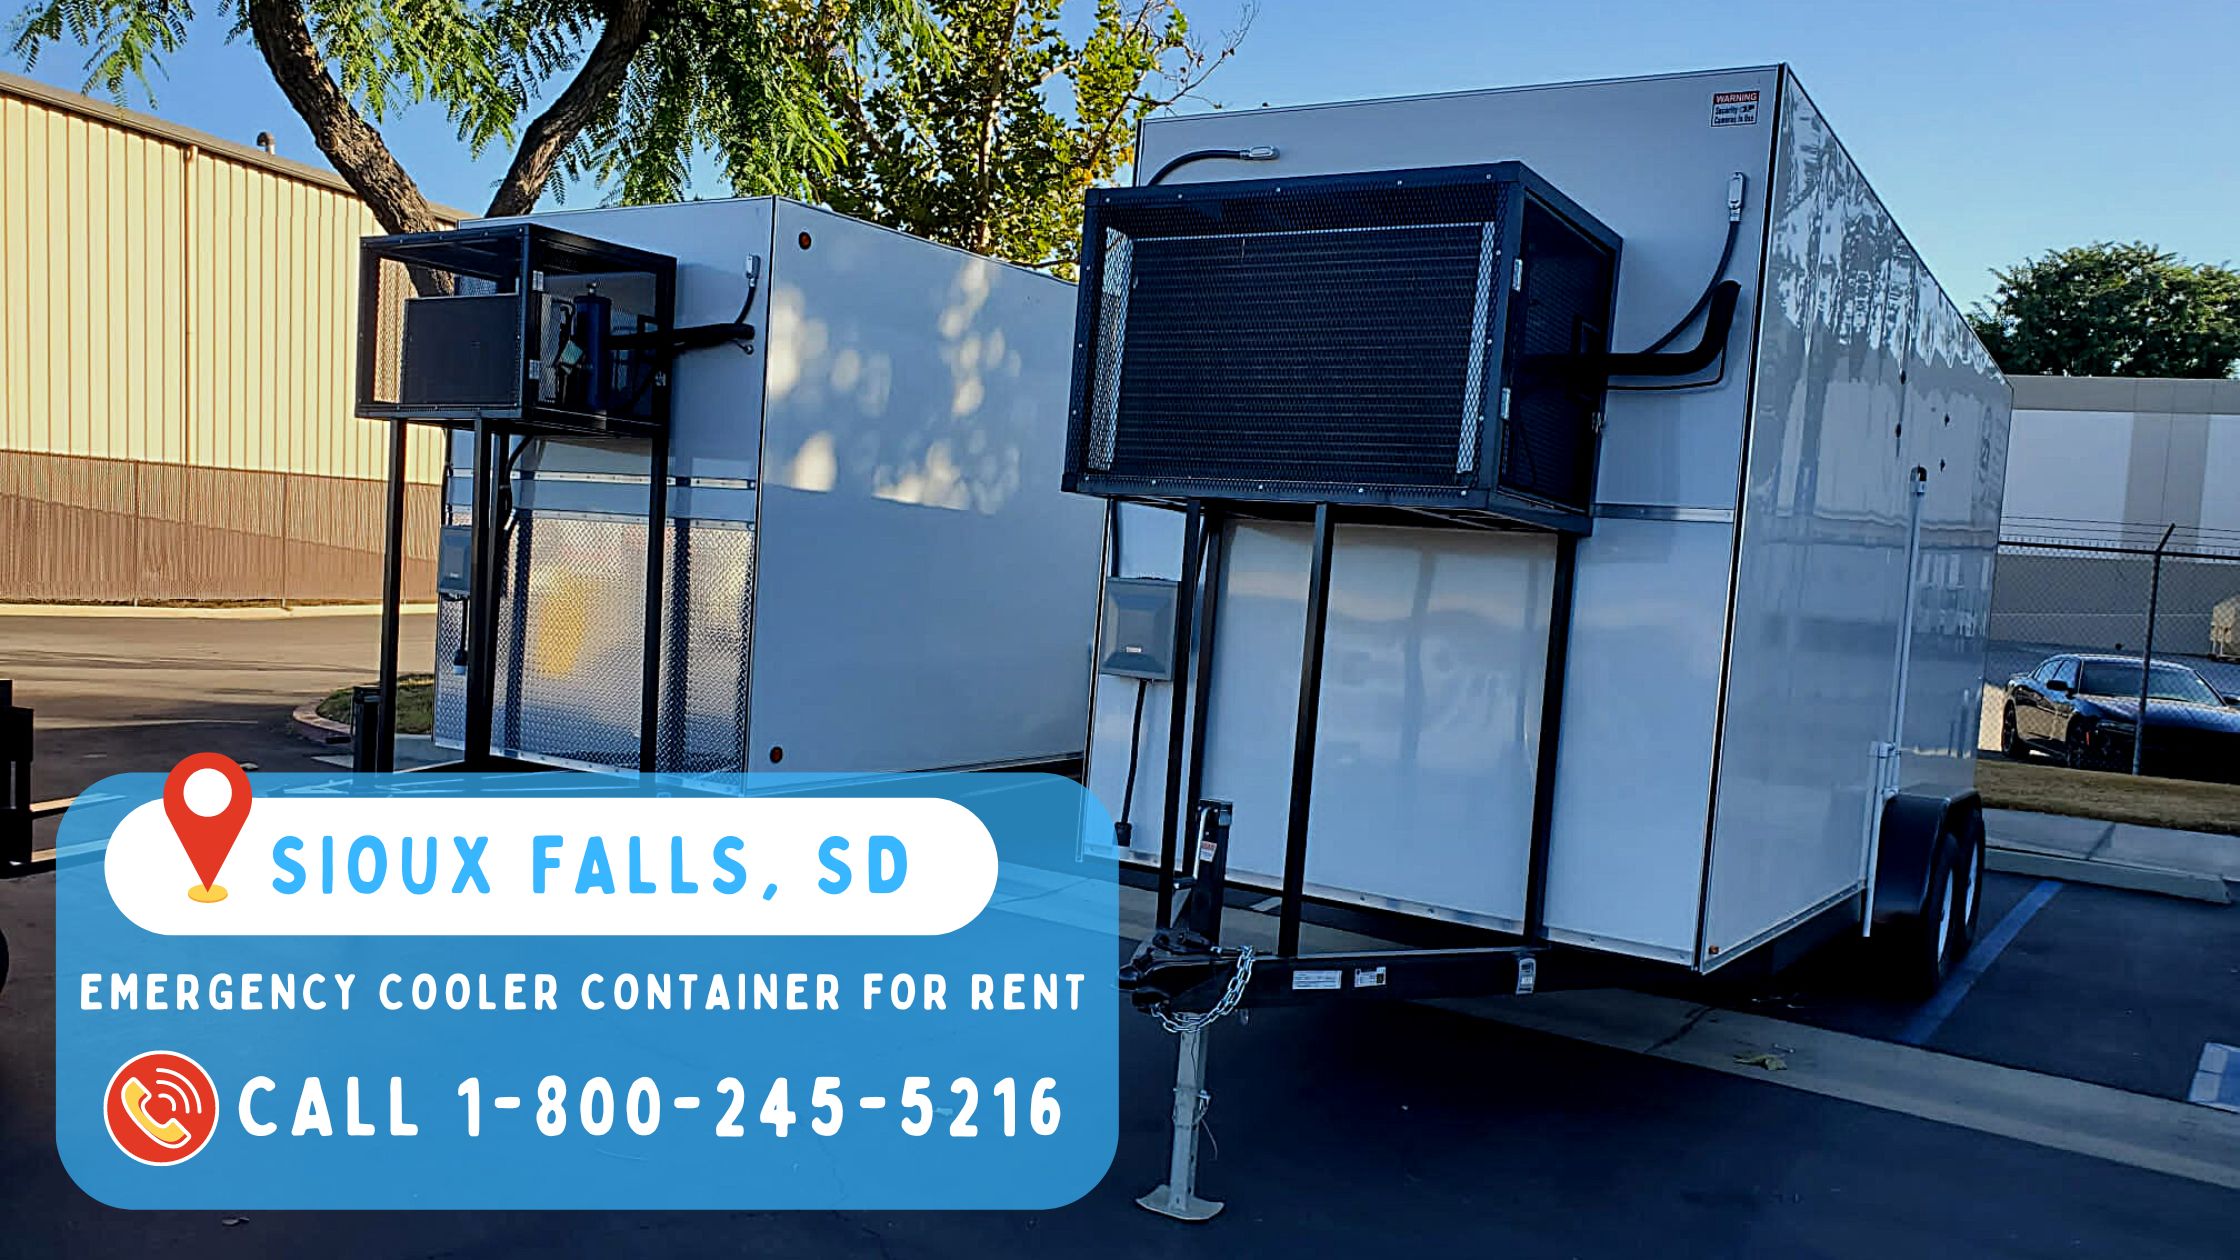 Emergency Cooler Container for Rent in Sioux Falls